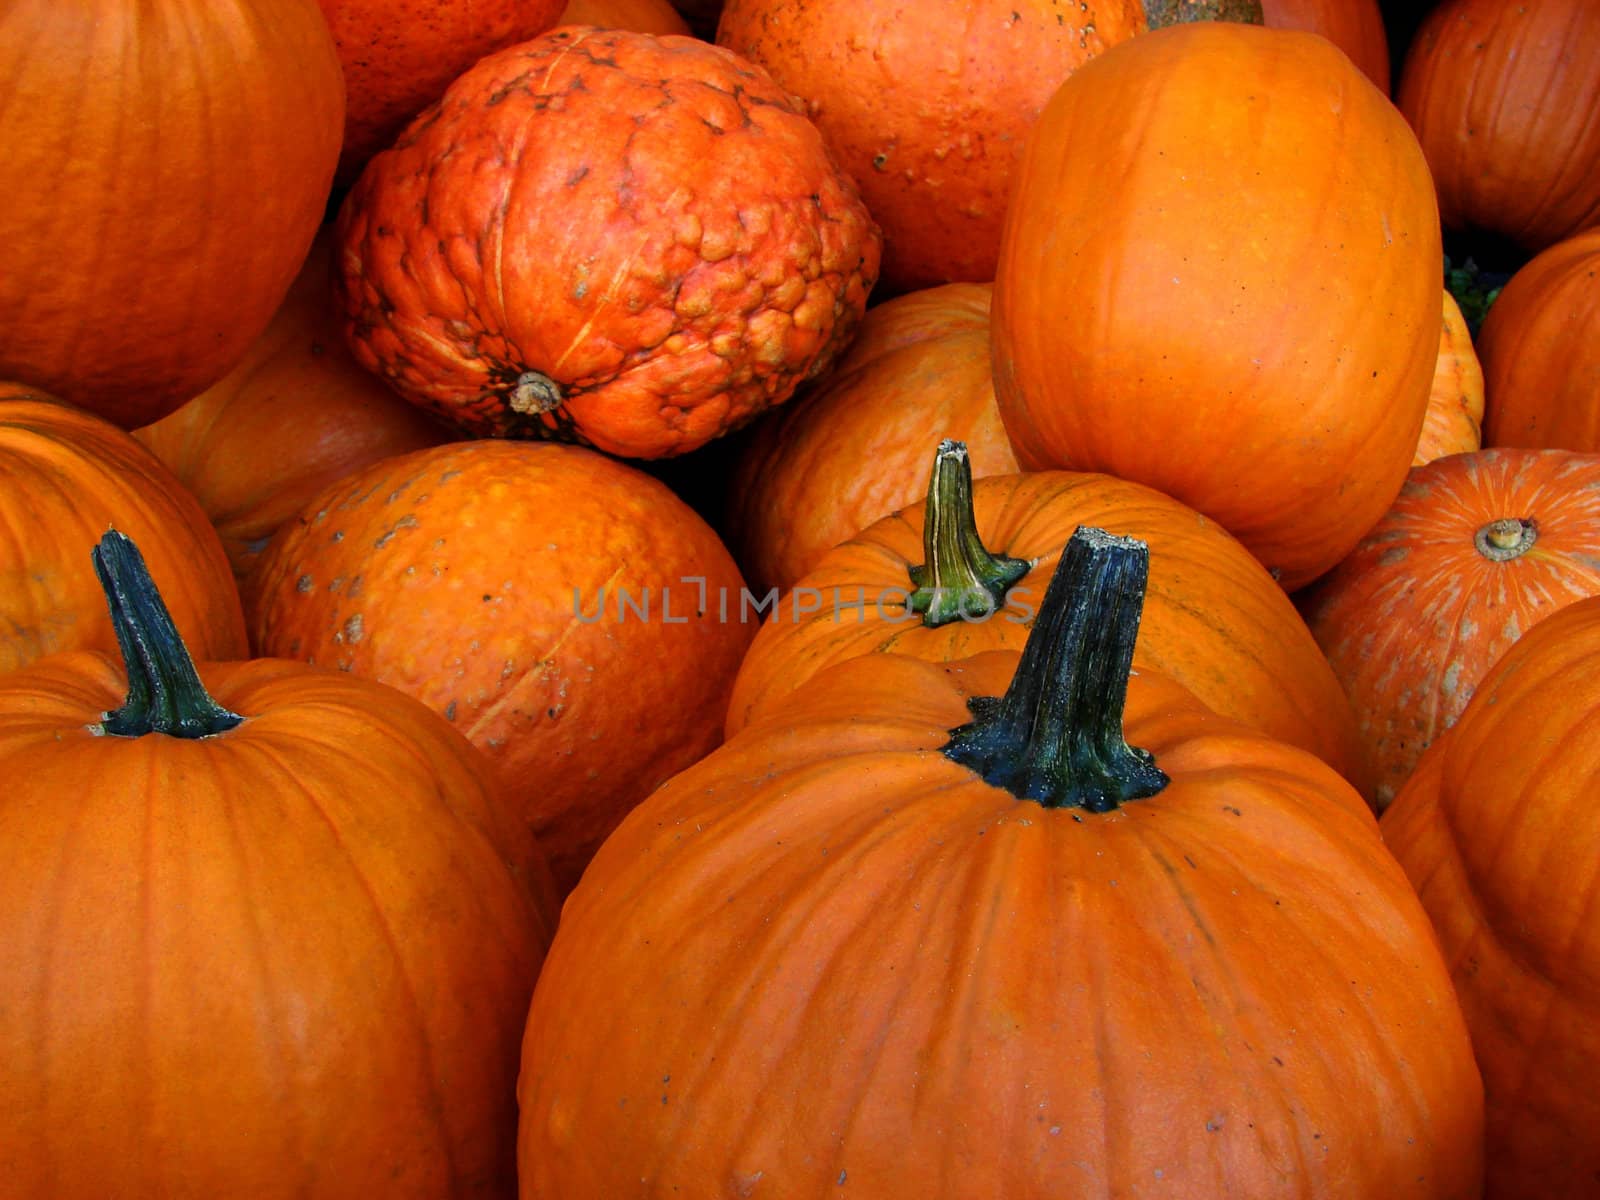 Close-up of small pumpkins in an autumn scene